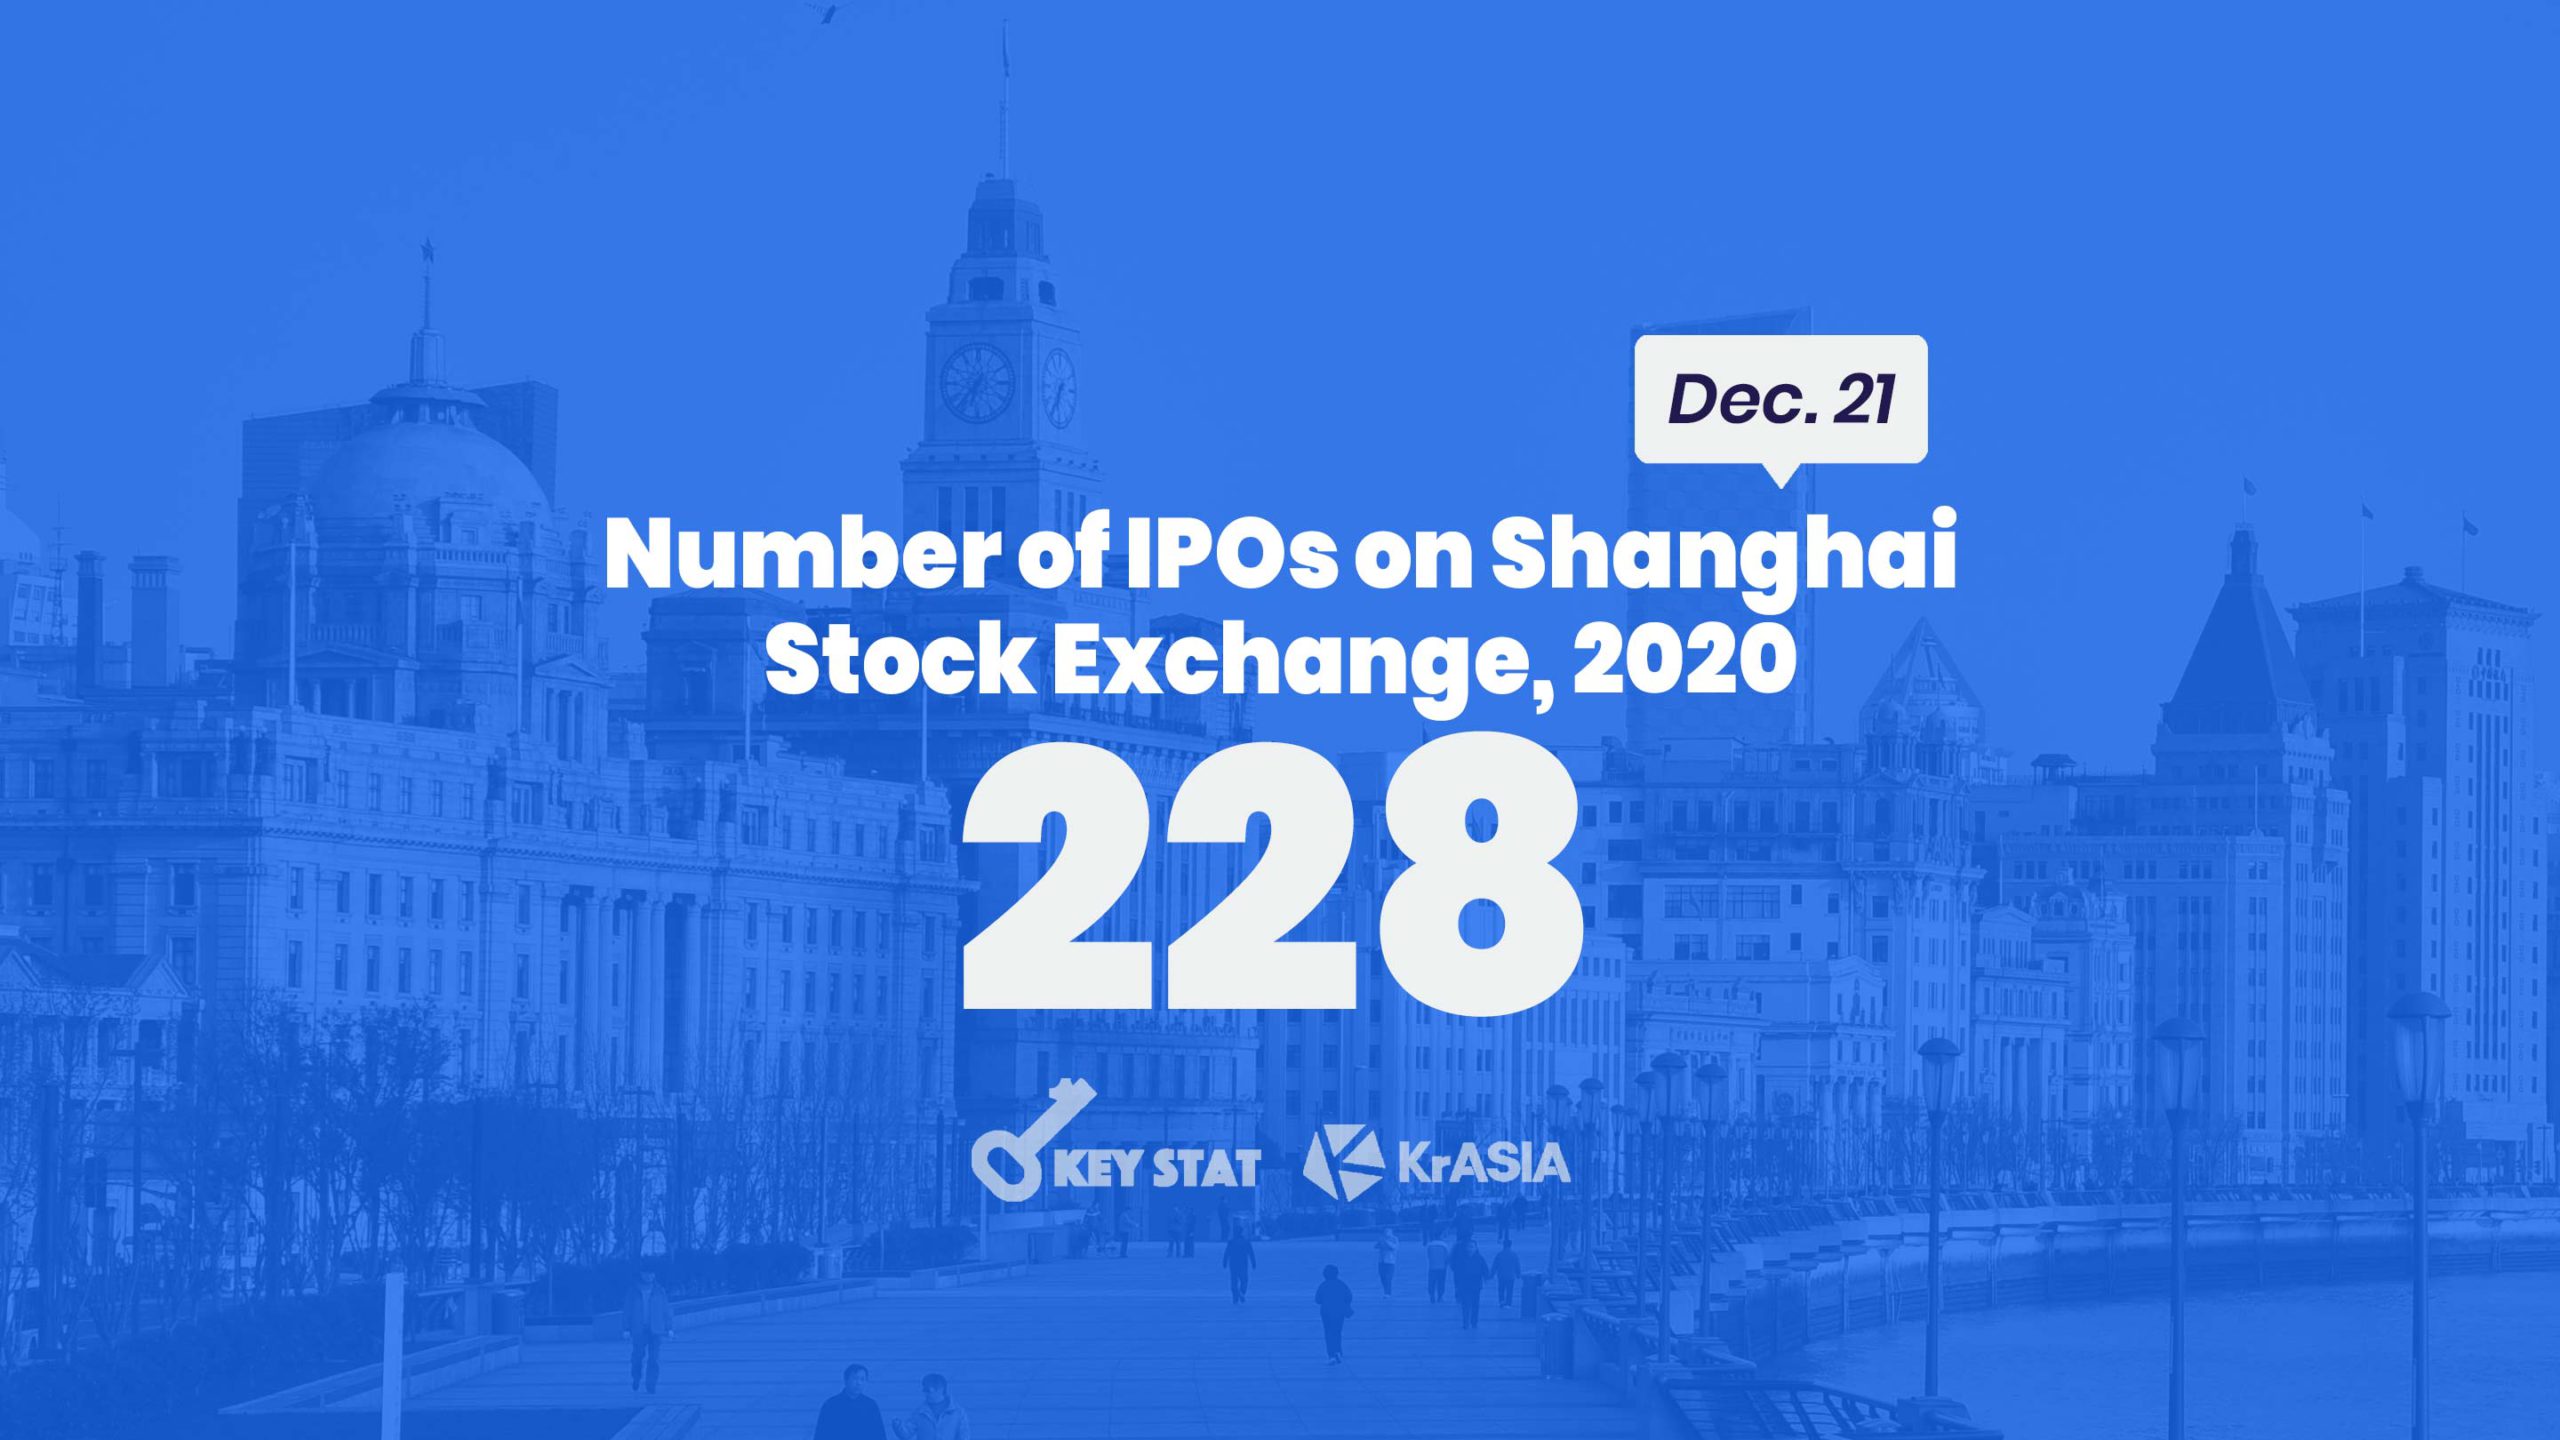 KEY STAT | Shanghai takes the crown as world number one exchange for IPOs in 2020